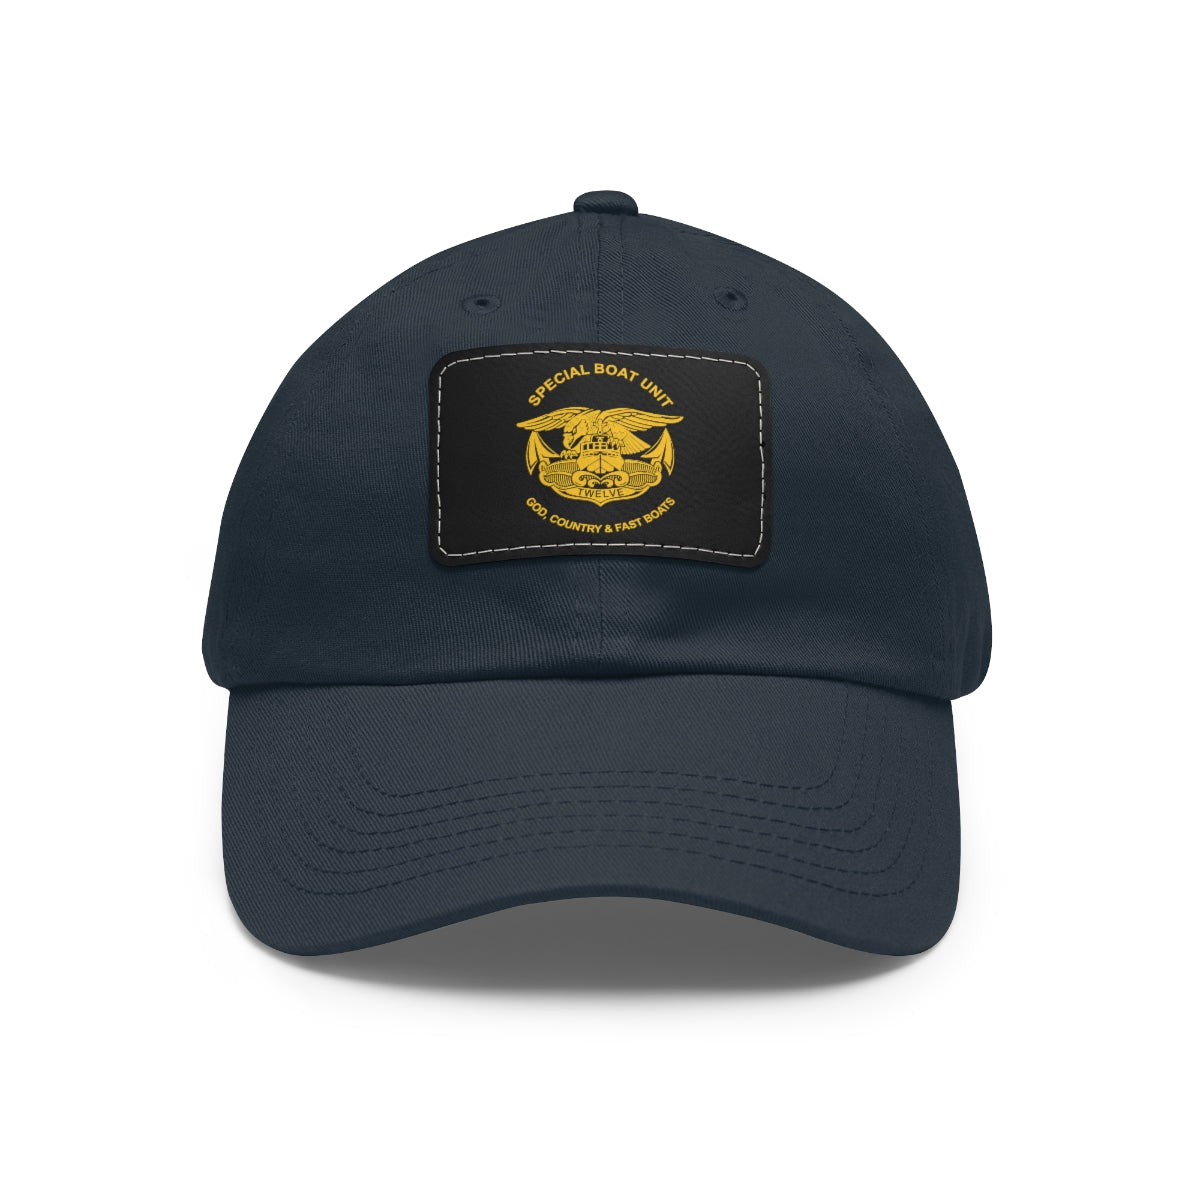 SBU 12 v2 Hat with Leather Patch (Gold)